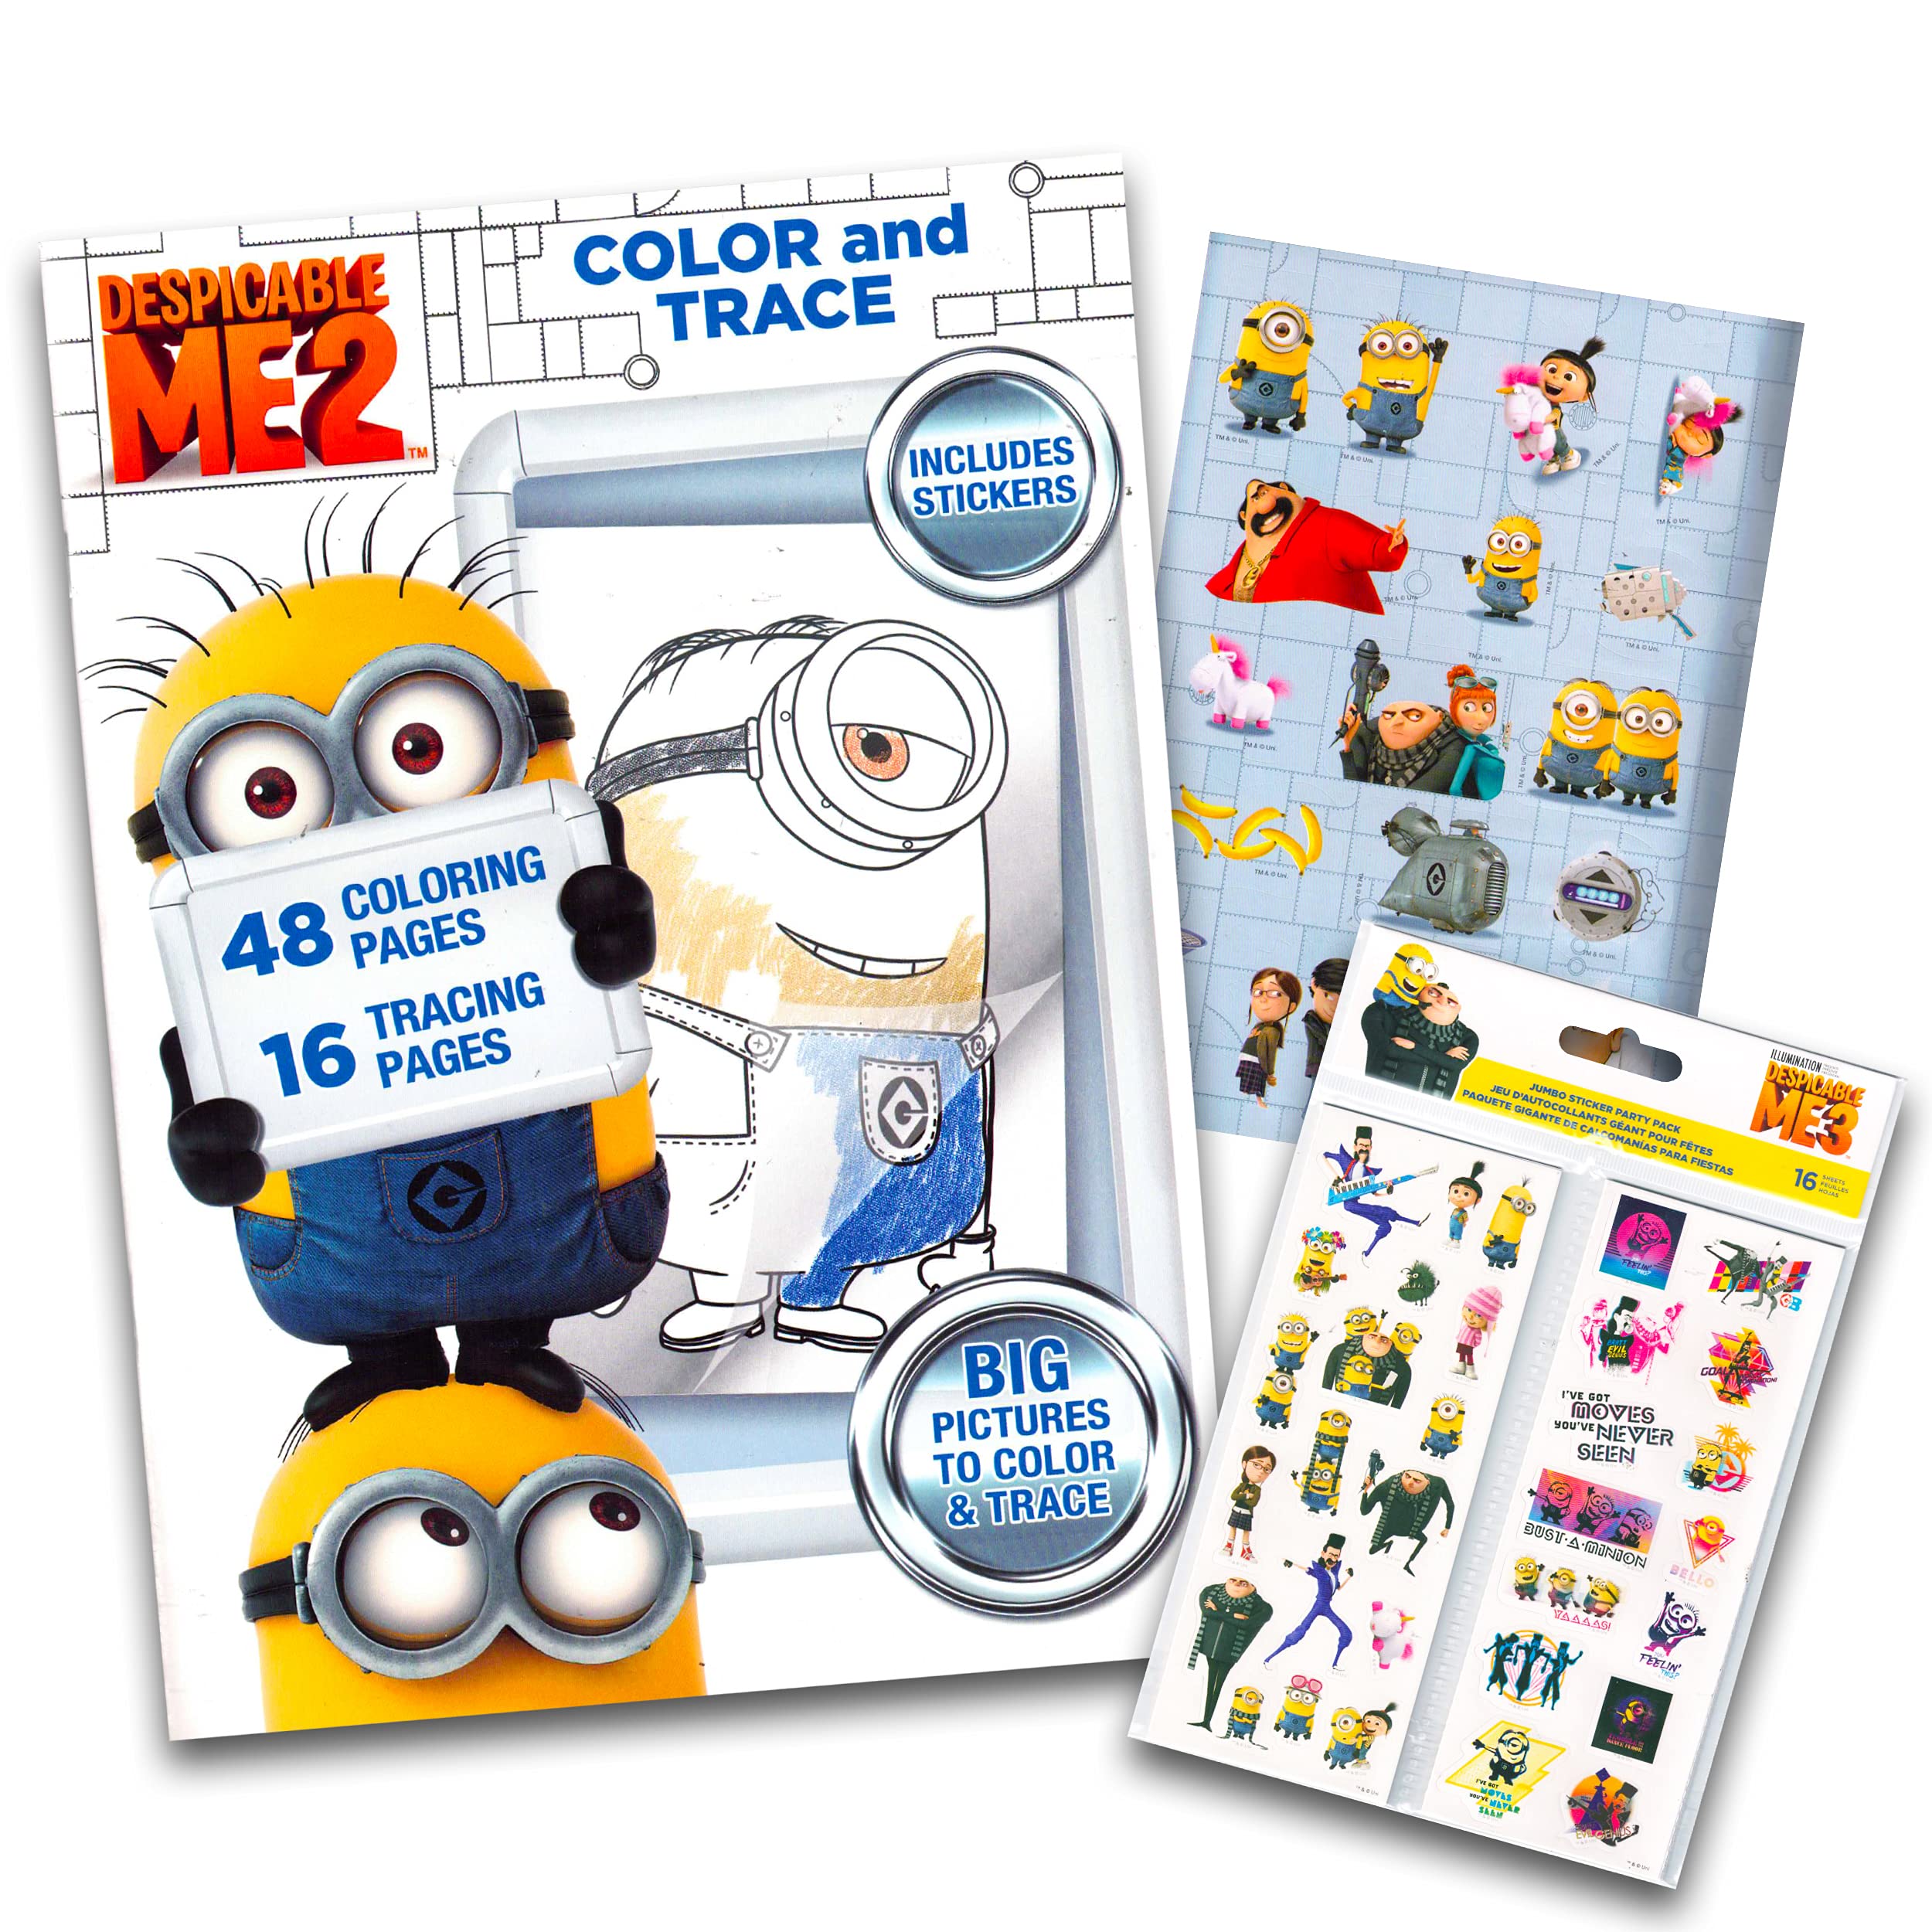 Despible me minions coloring book with stickers over stickers toys games